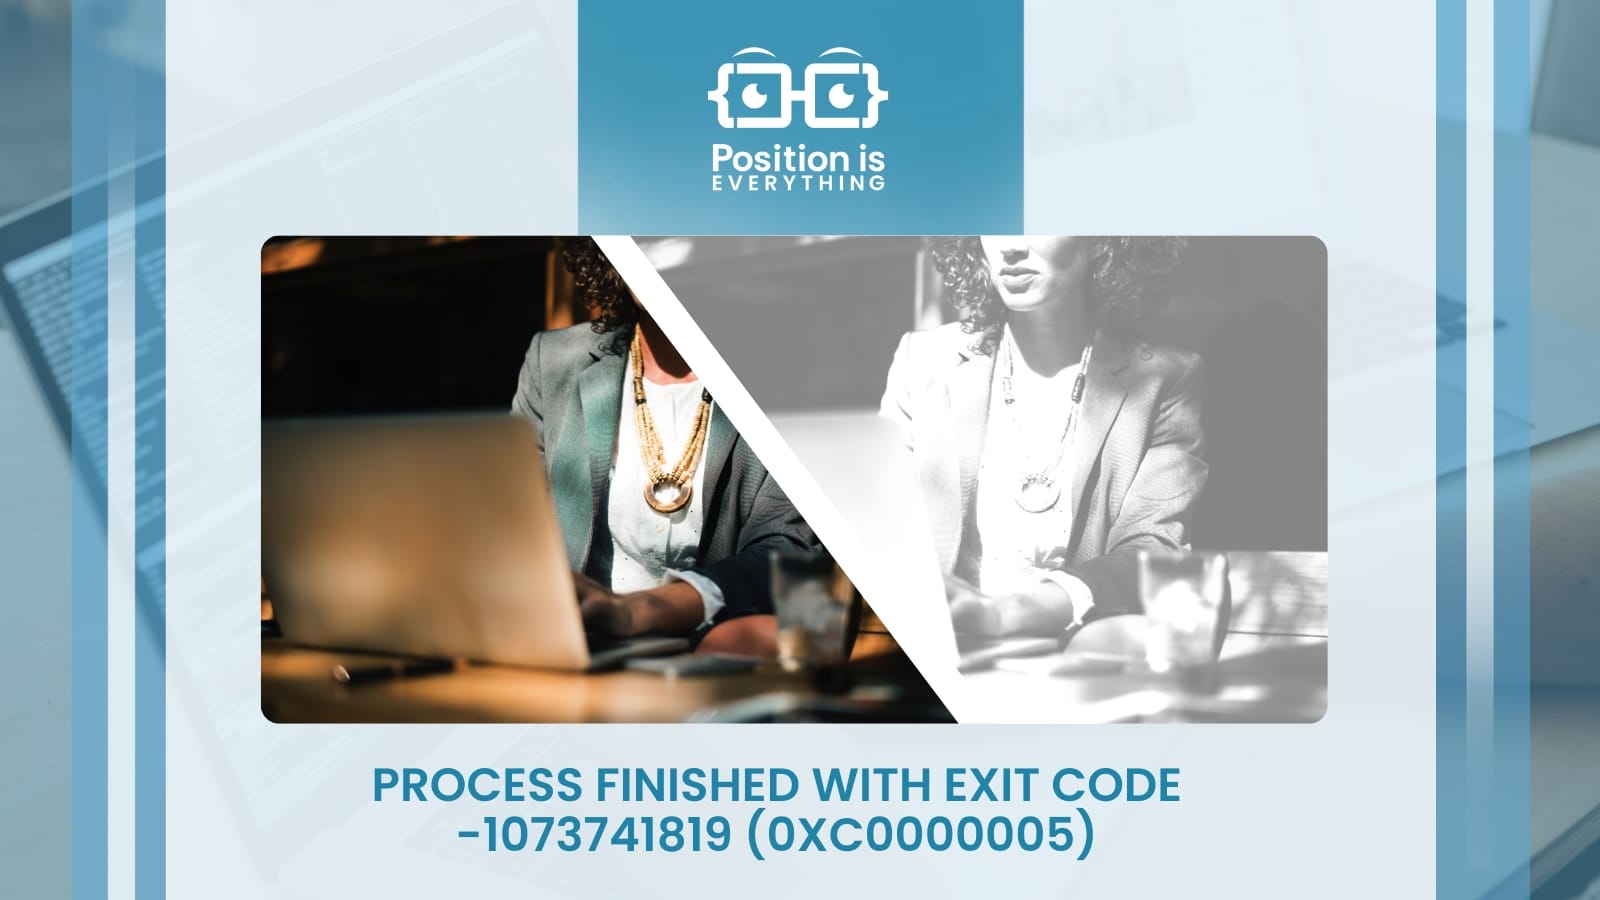 Process Finished With Exit Code -1073741819 (0Xc0000005)